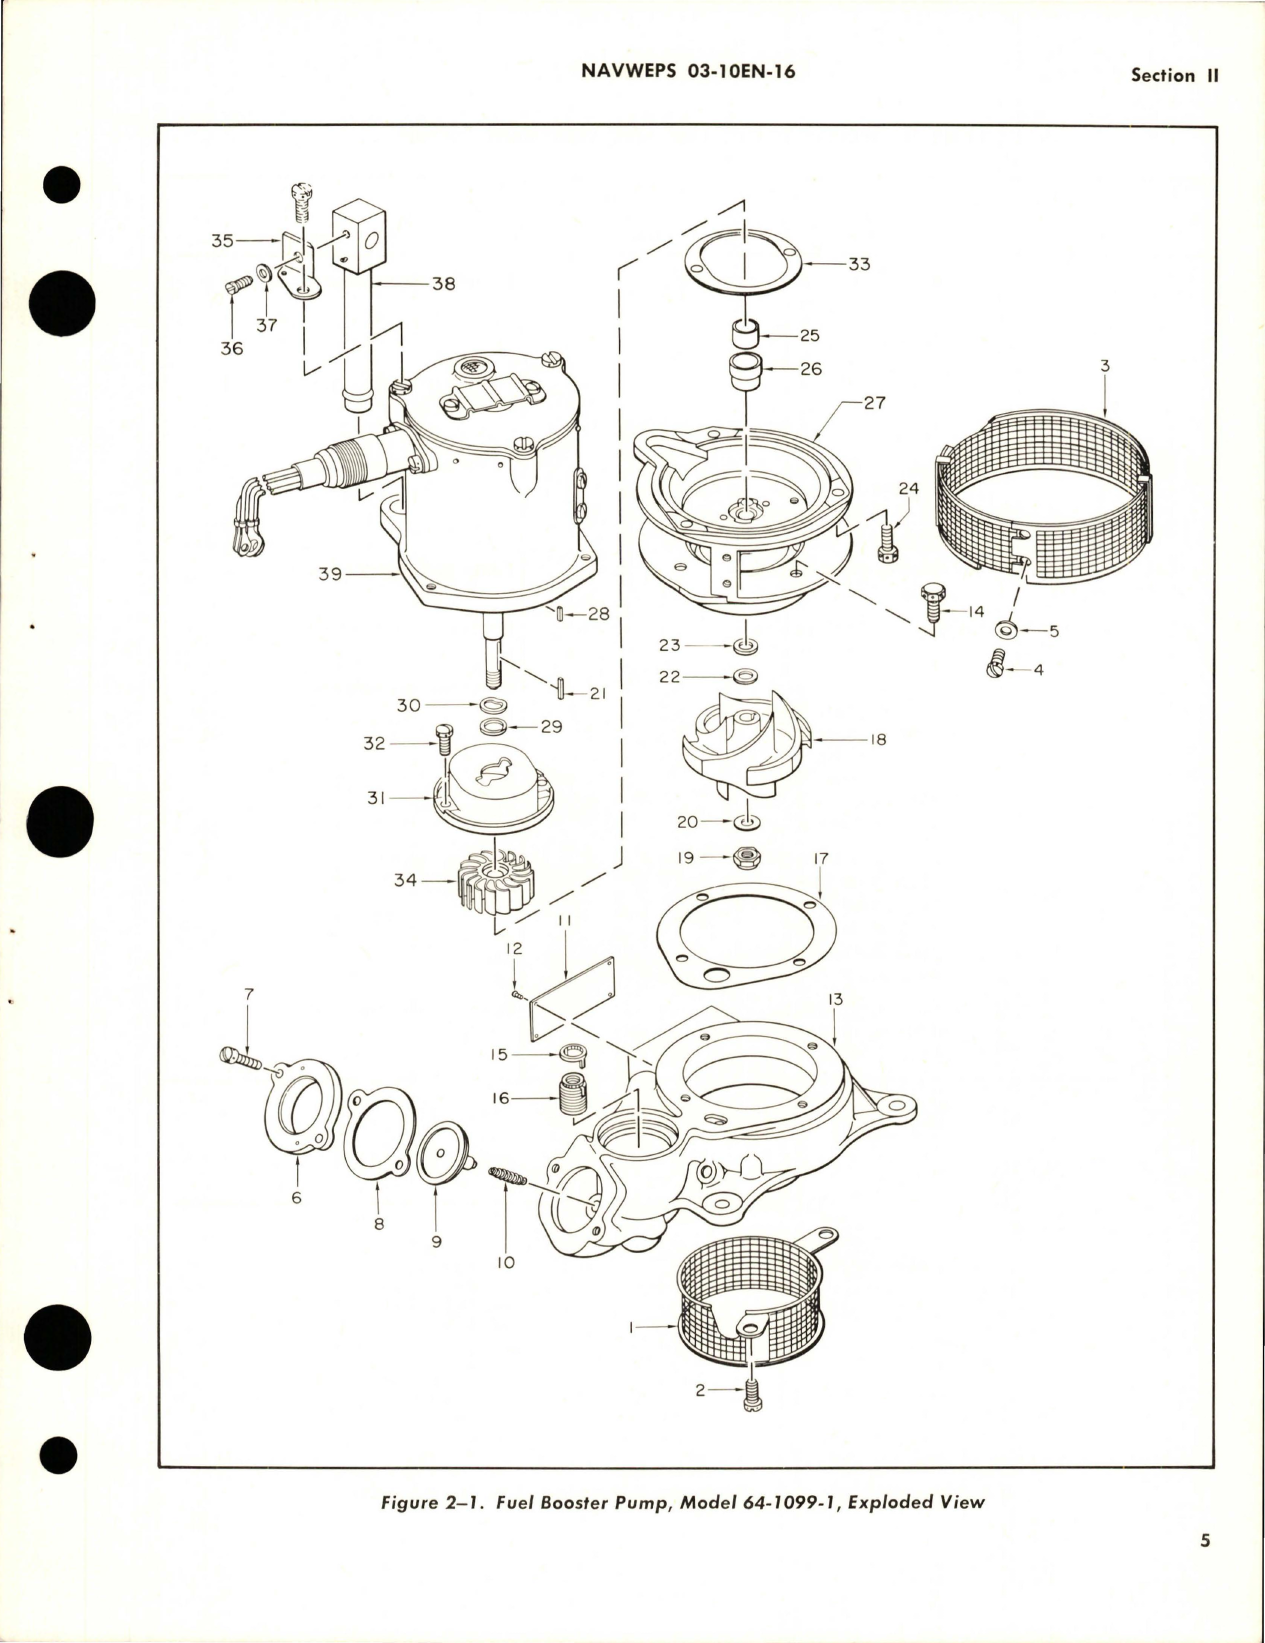 Sample page 7 from AirCorps Library document: Overhaul Instructions for Fuel Booster Pump - Model 64-1099-1